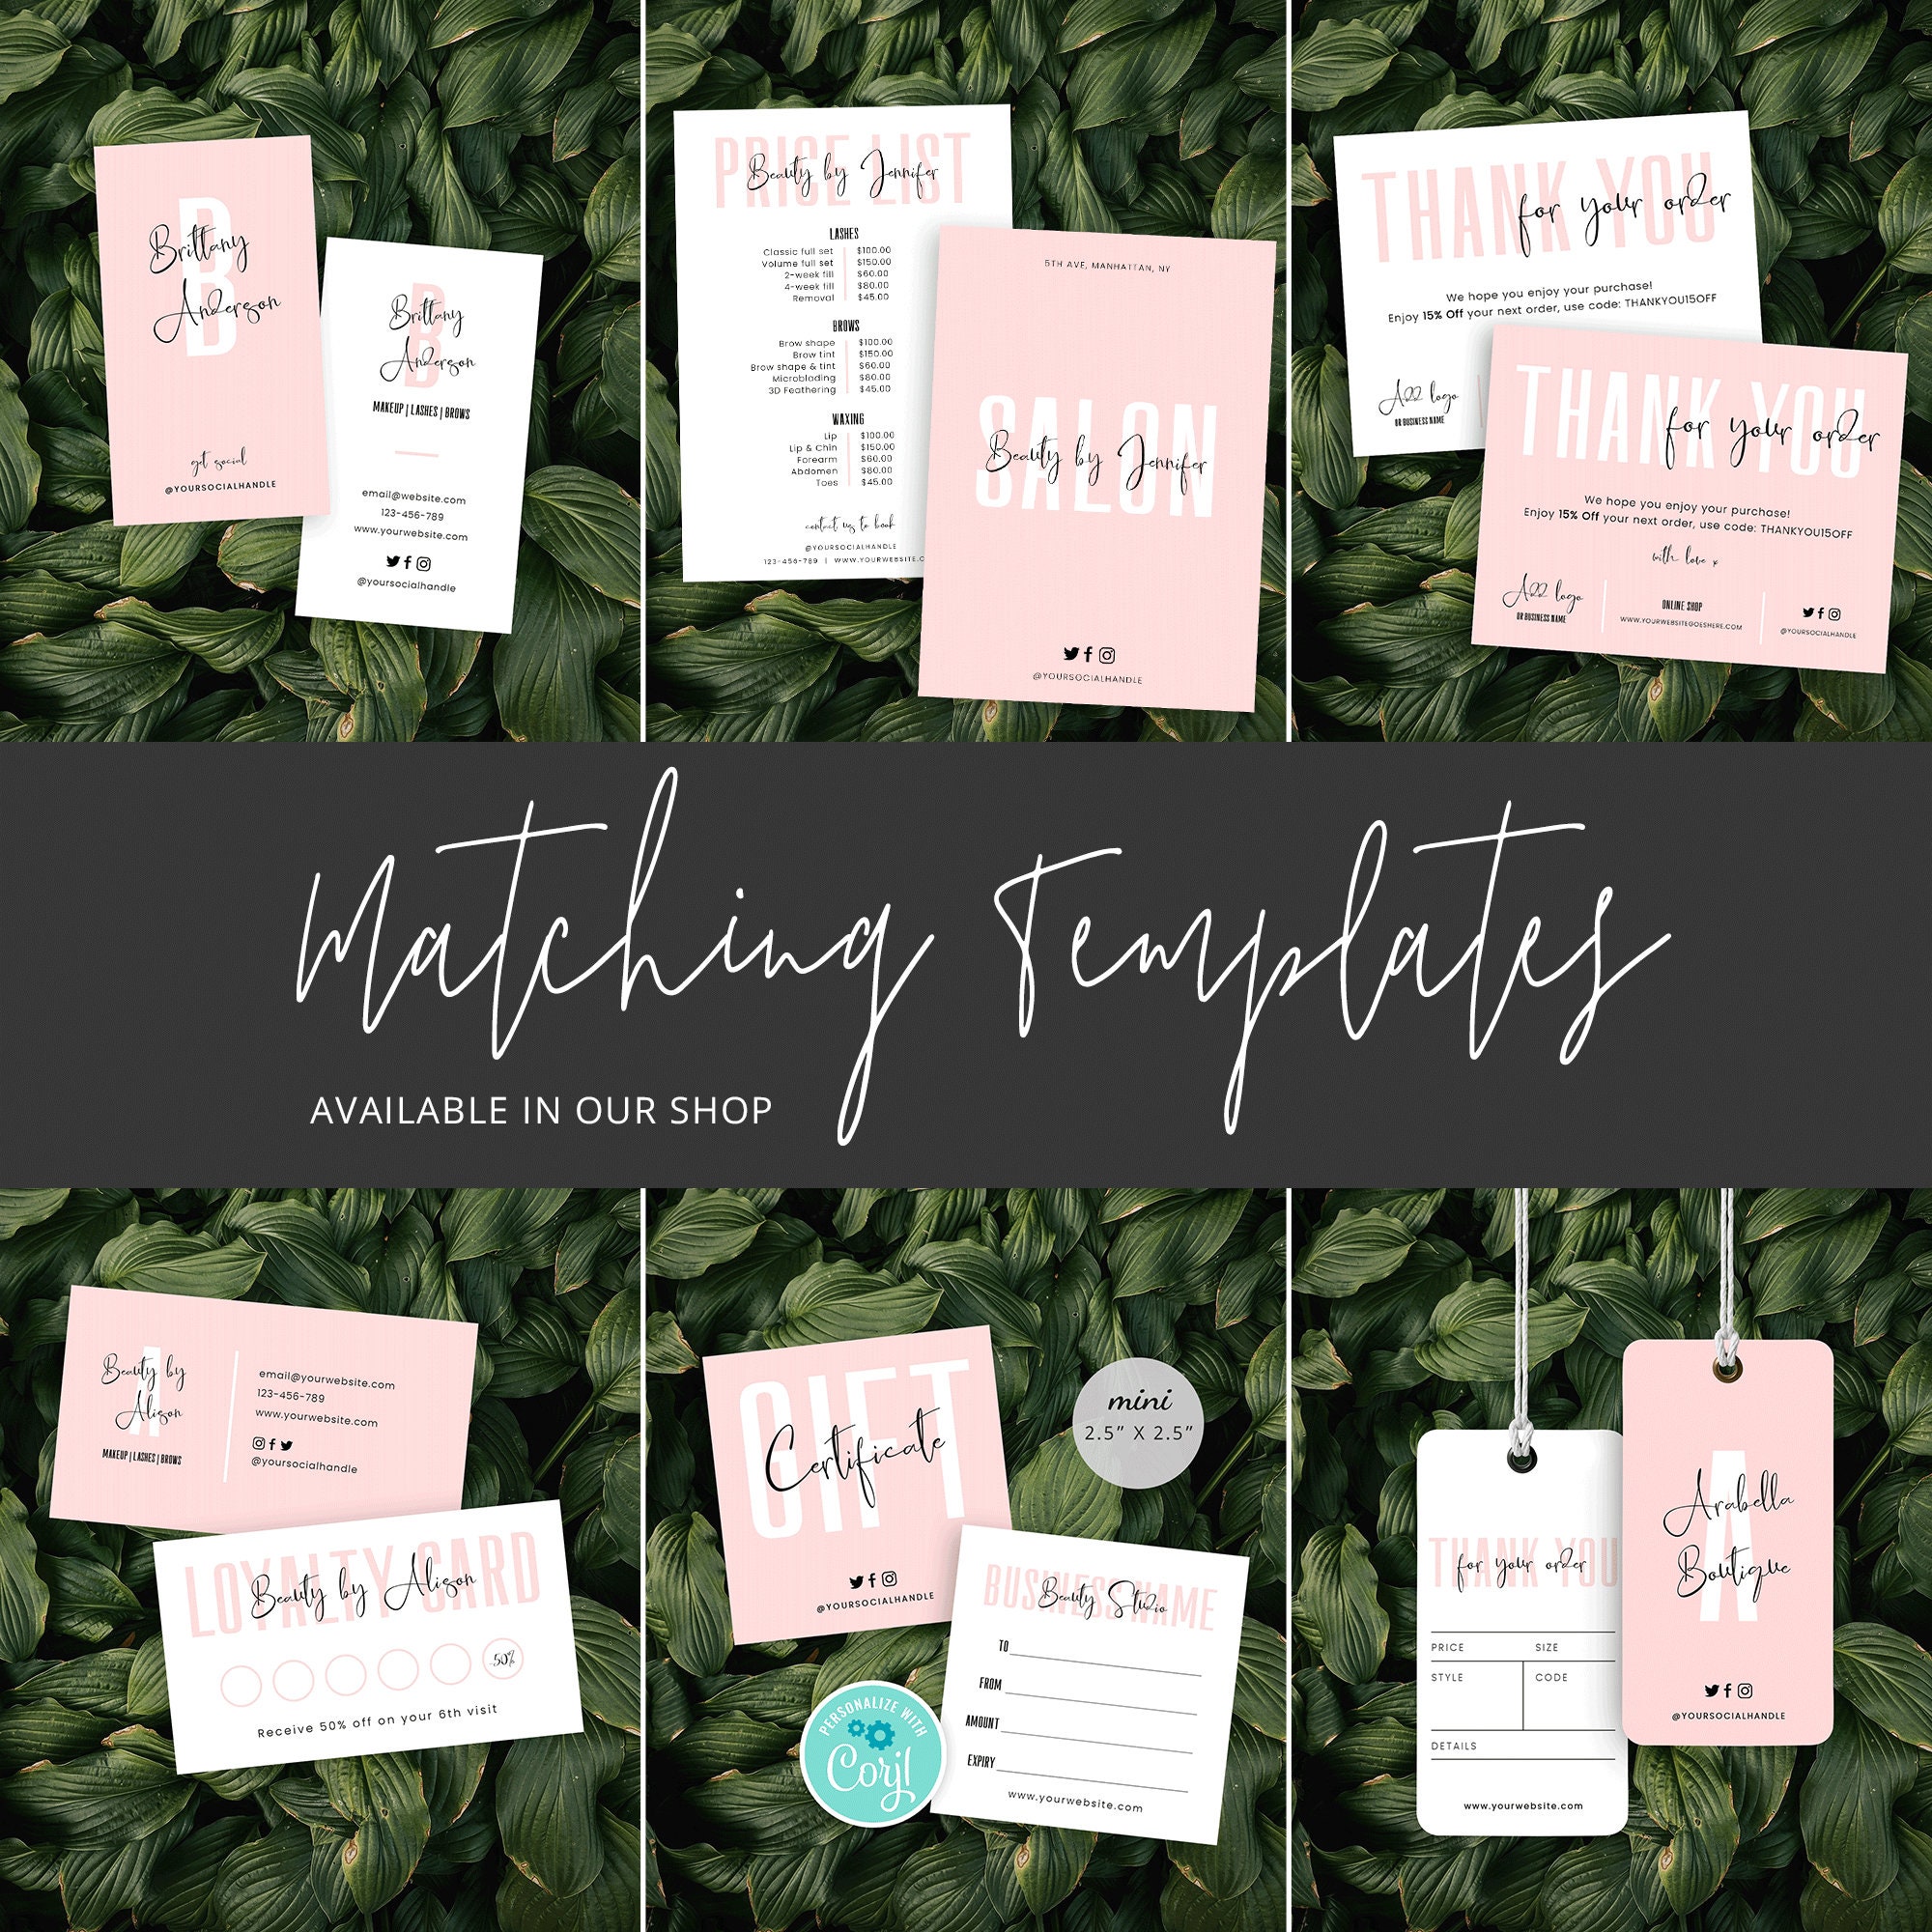 PRINTABLE Jewellery Display Template Jewelry Display Cards Template  Editable Earrings Display Cards Feminine Necklace Hang Tags 